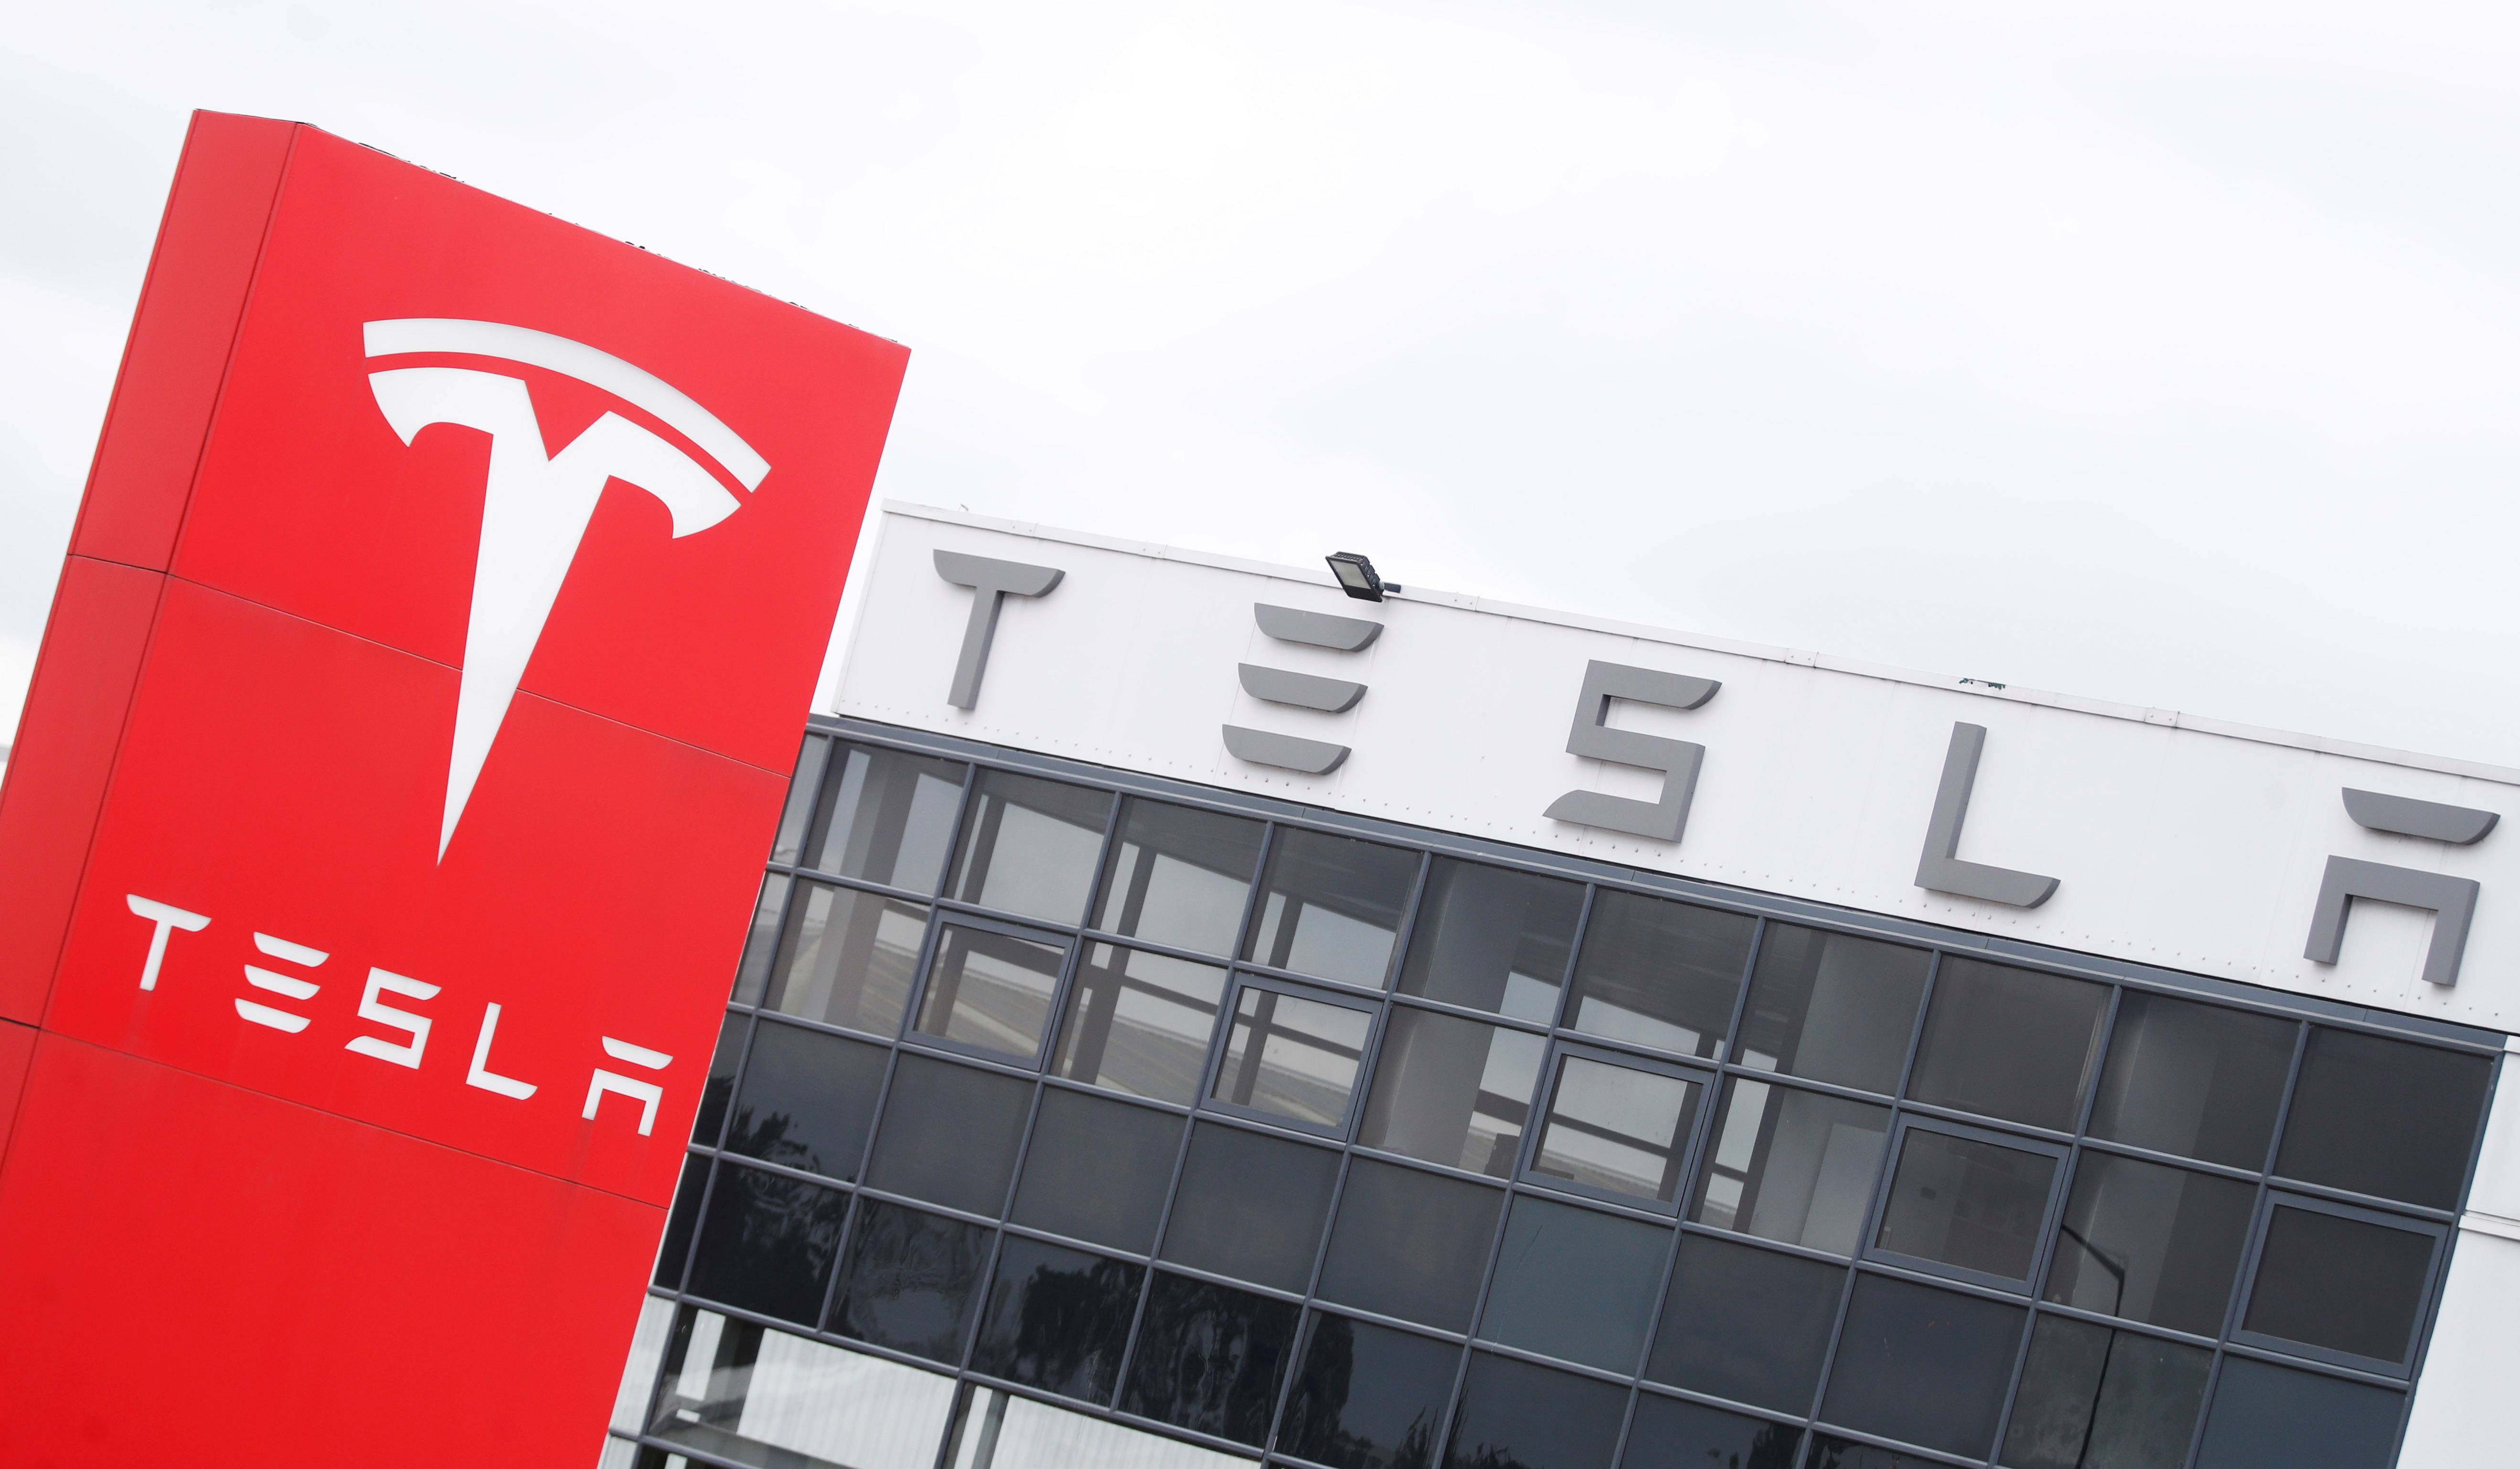 The logo of car manufacturer Tesla is seen at a dealership in London, Britain, May 14, 2021. REUTERS/Matthew Childs